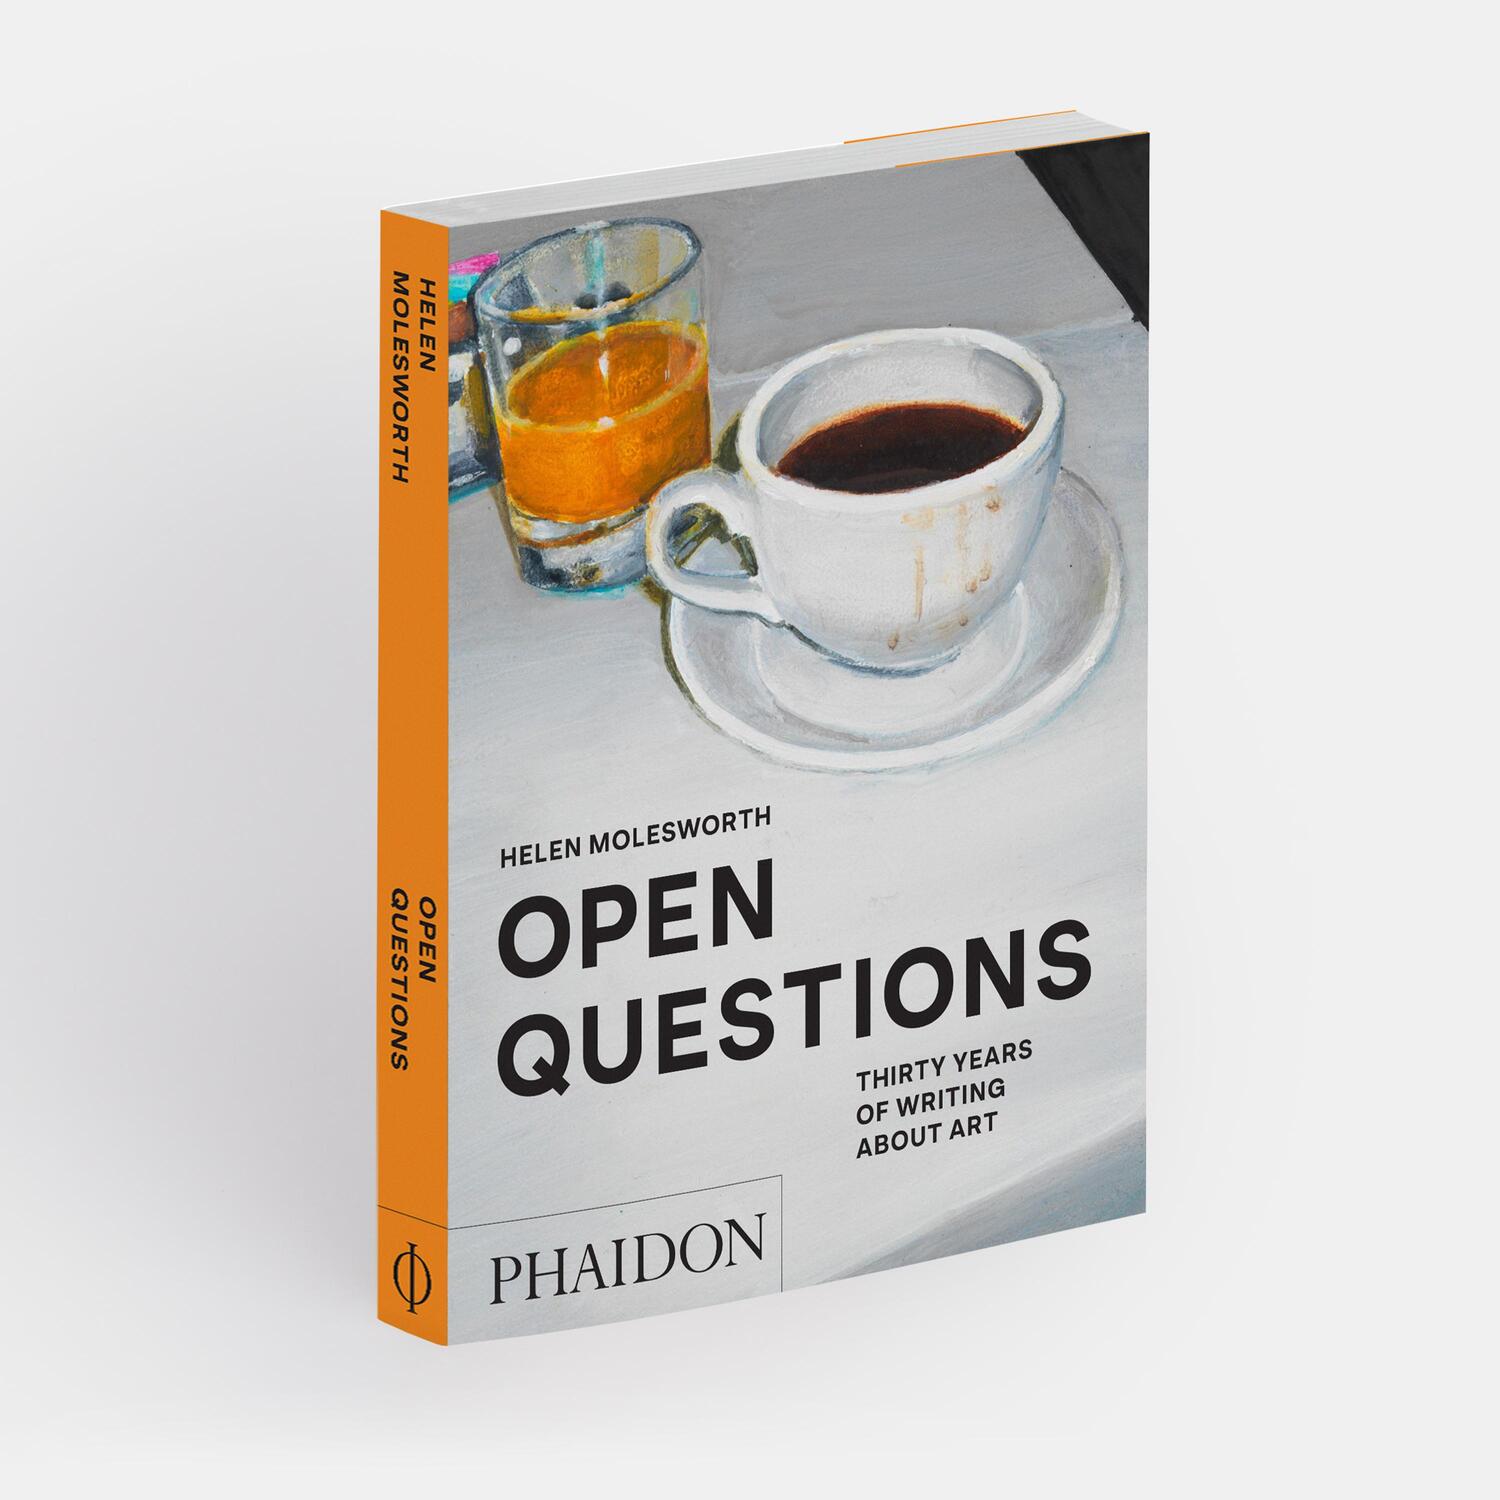 Bild: 9781838666057 | Open Questions | Thirty Years of Writing about Art | Helen Molesworth